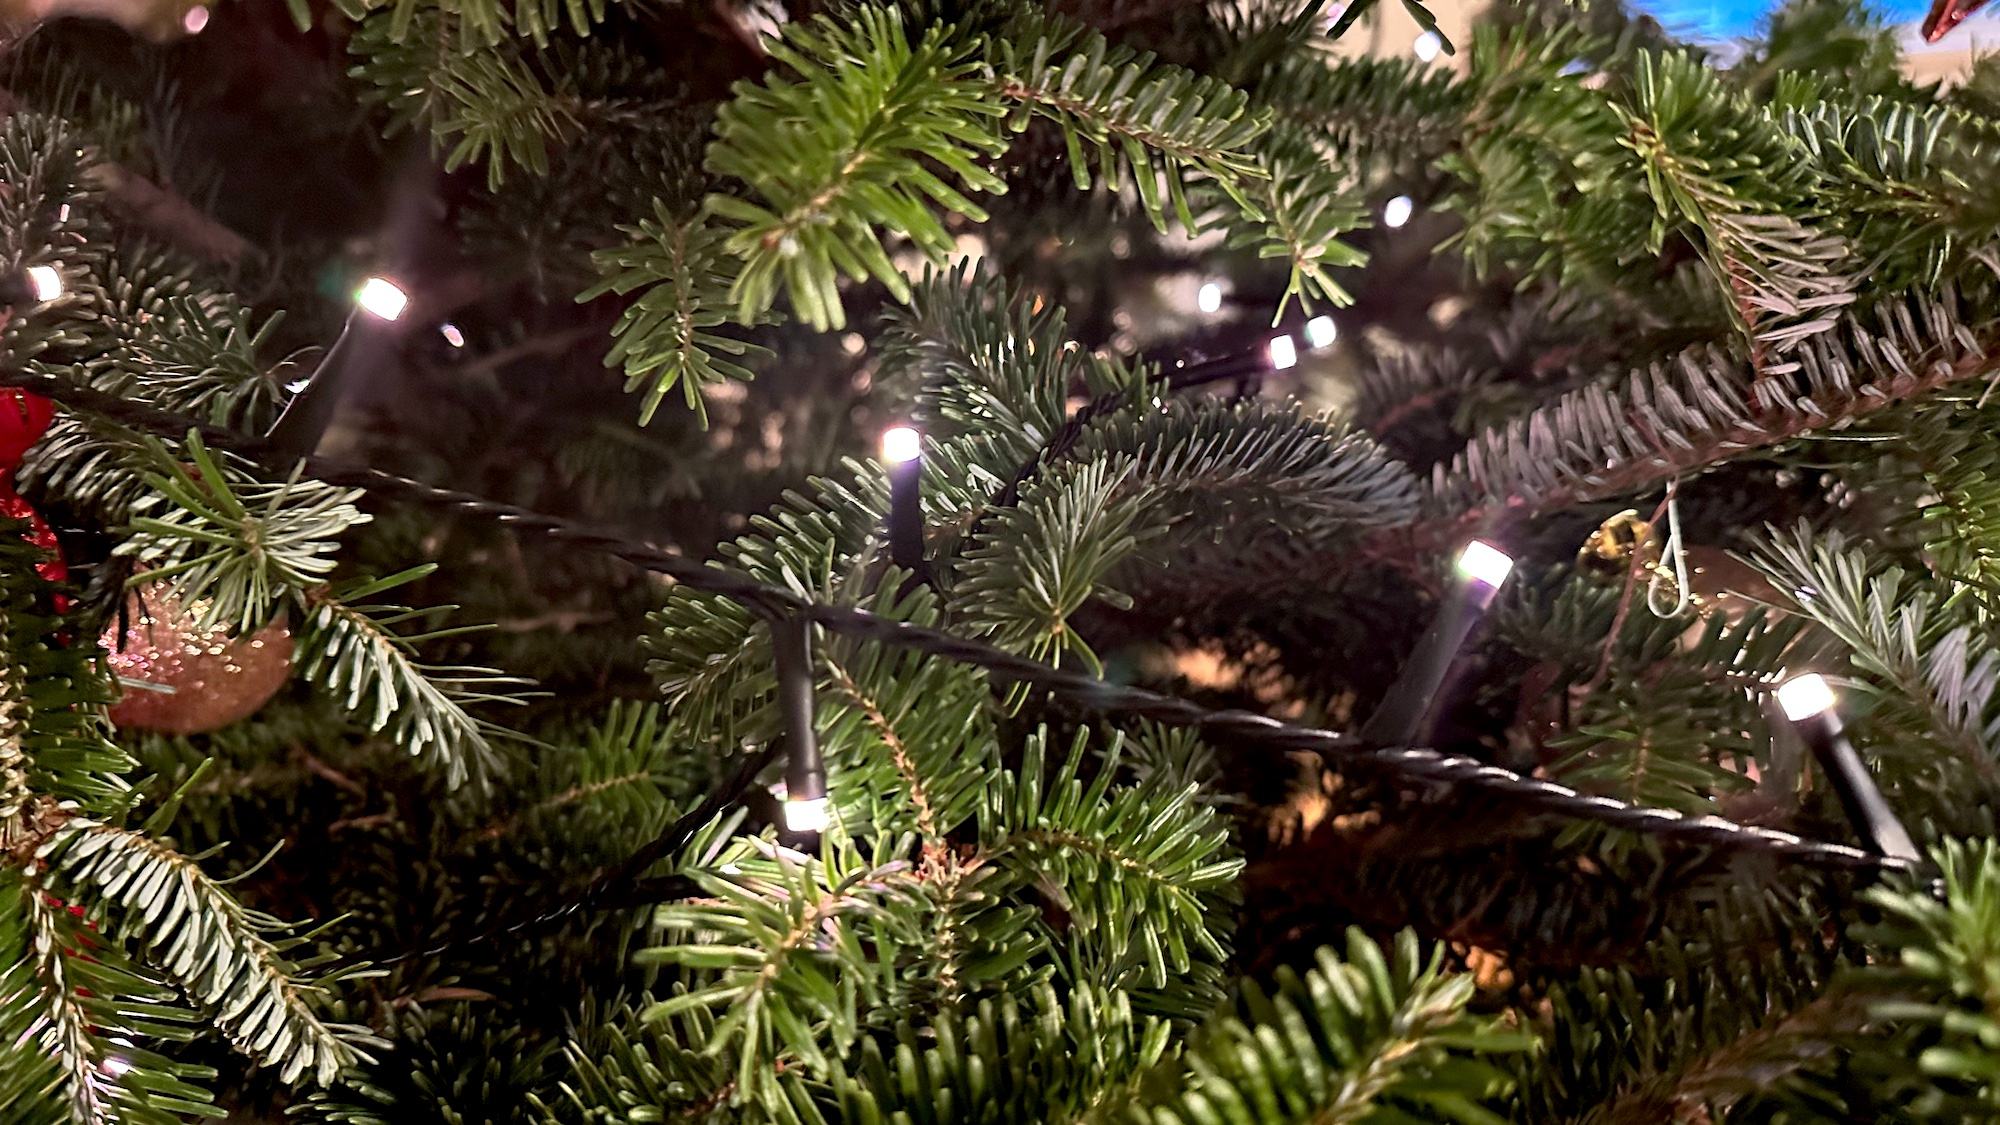 Philips Hue Festavia are the smart lights I know I needed for my Christmas tree | Tom's Guide